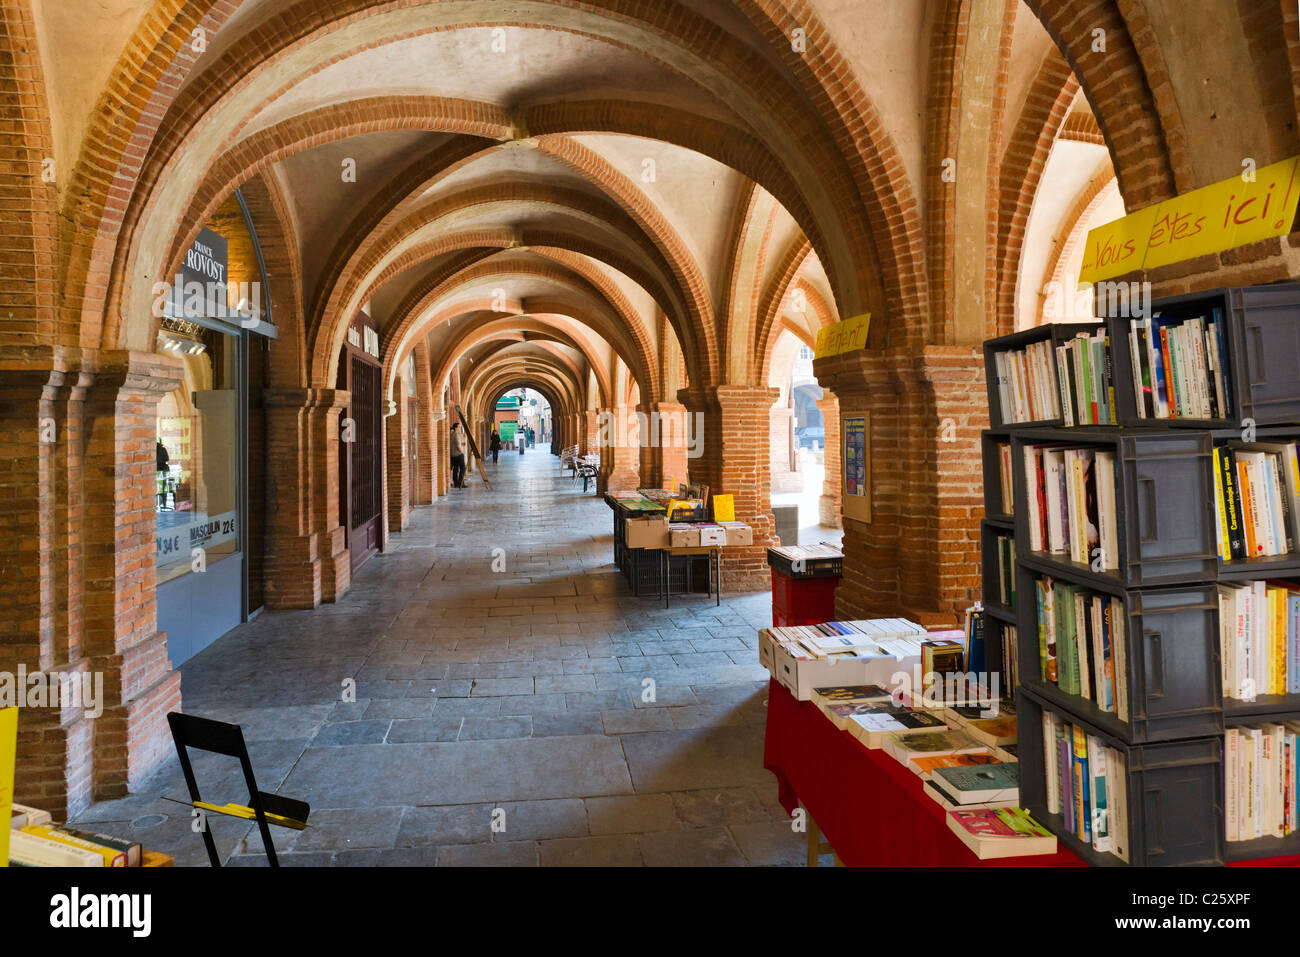 Vaulted arcade in the Place Nationale, Montauban, The Lot, France Stock Photo